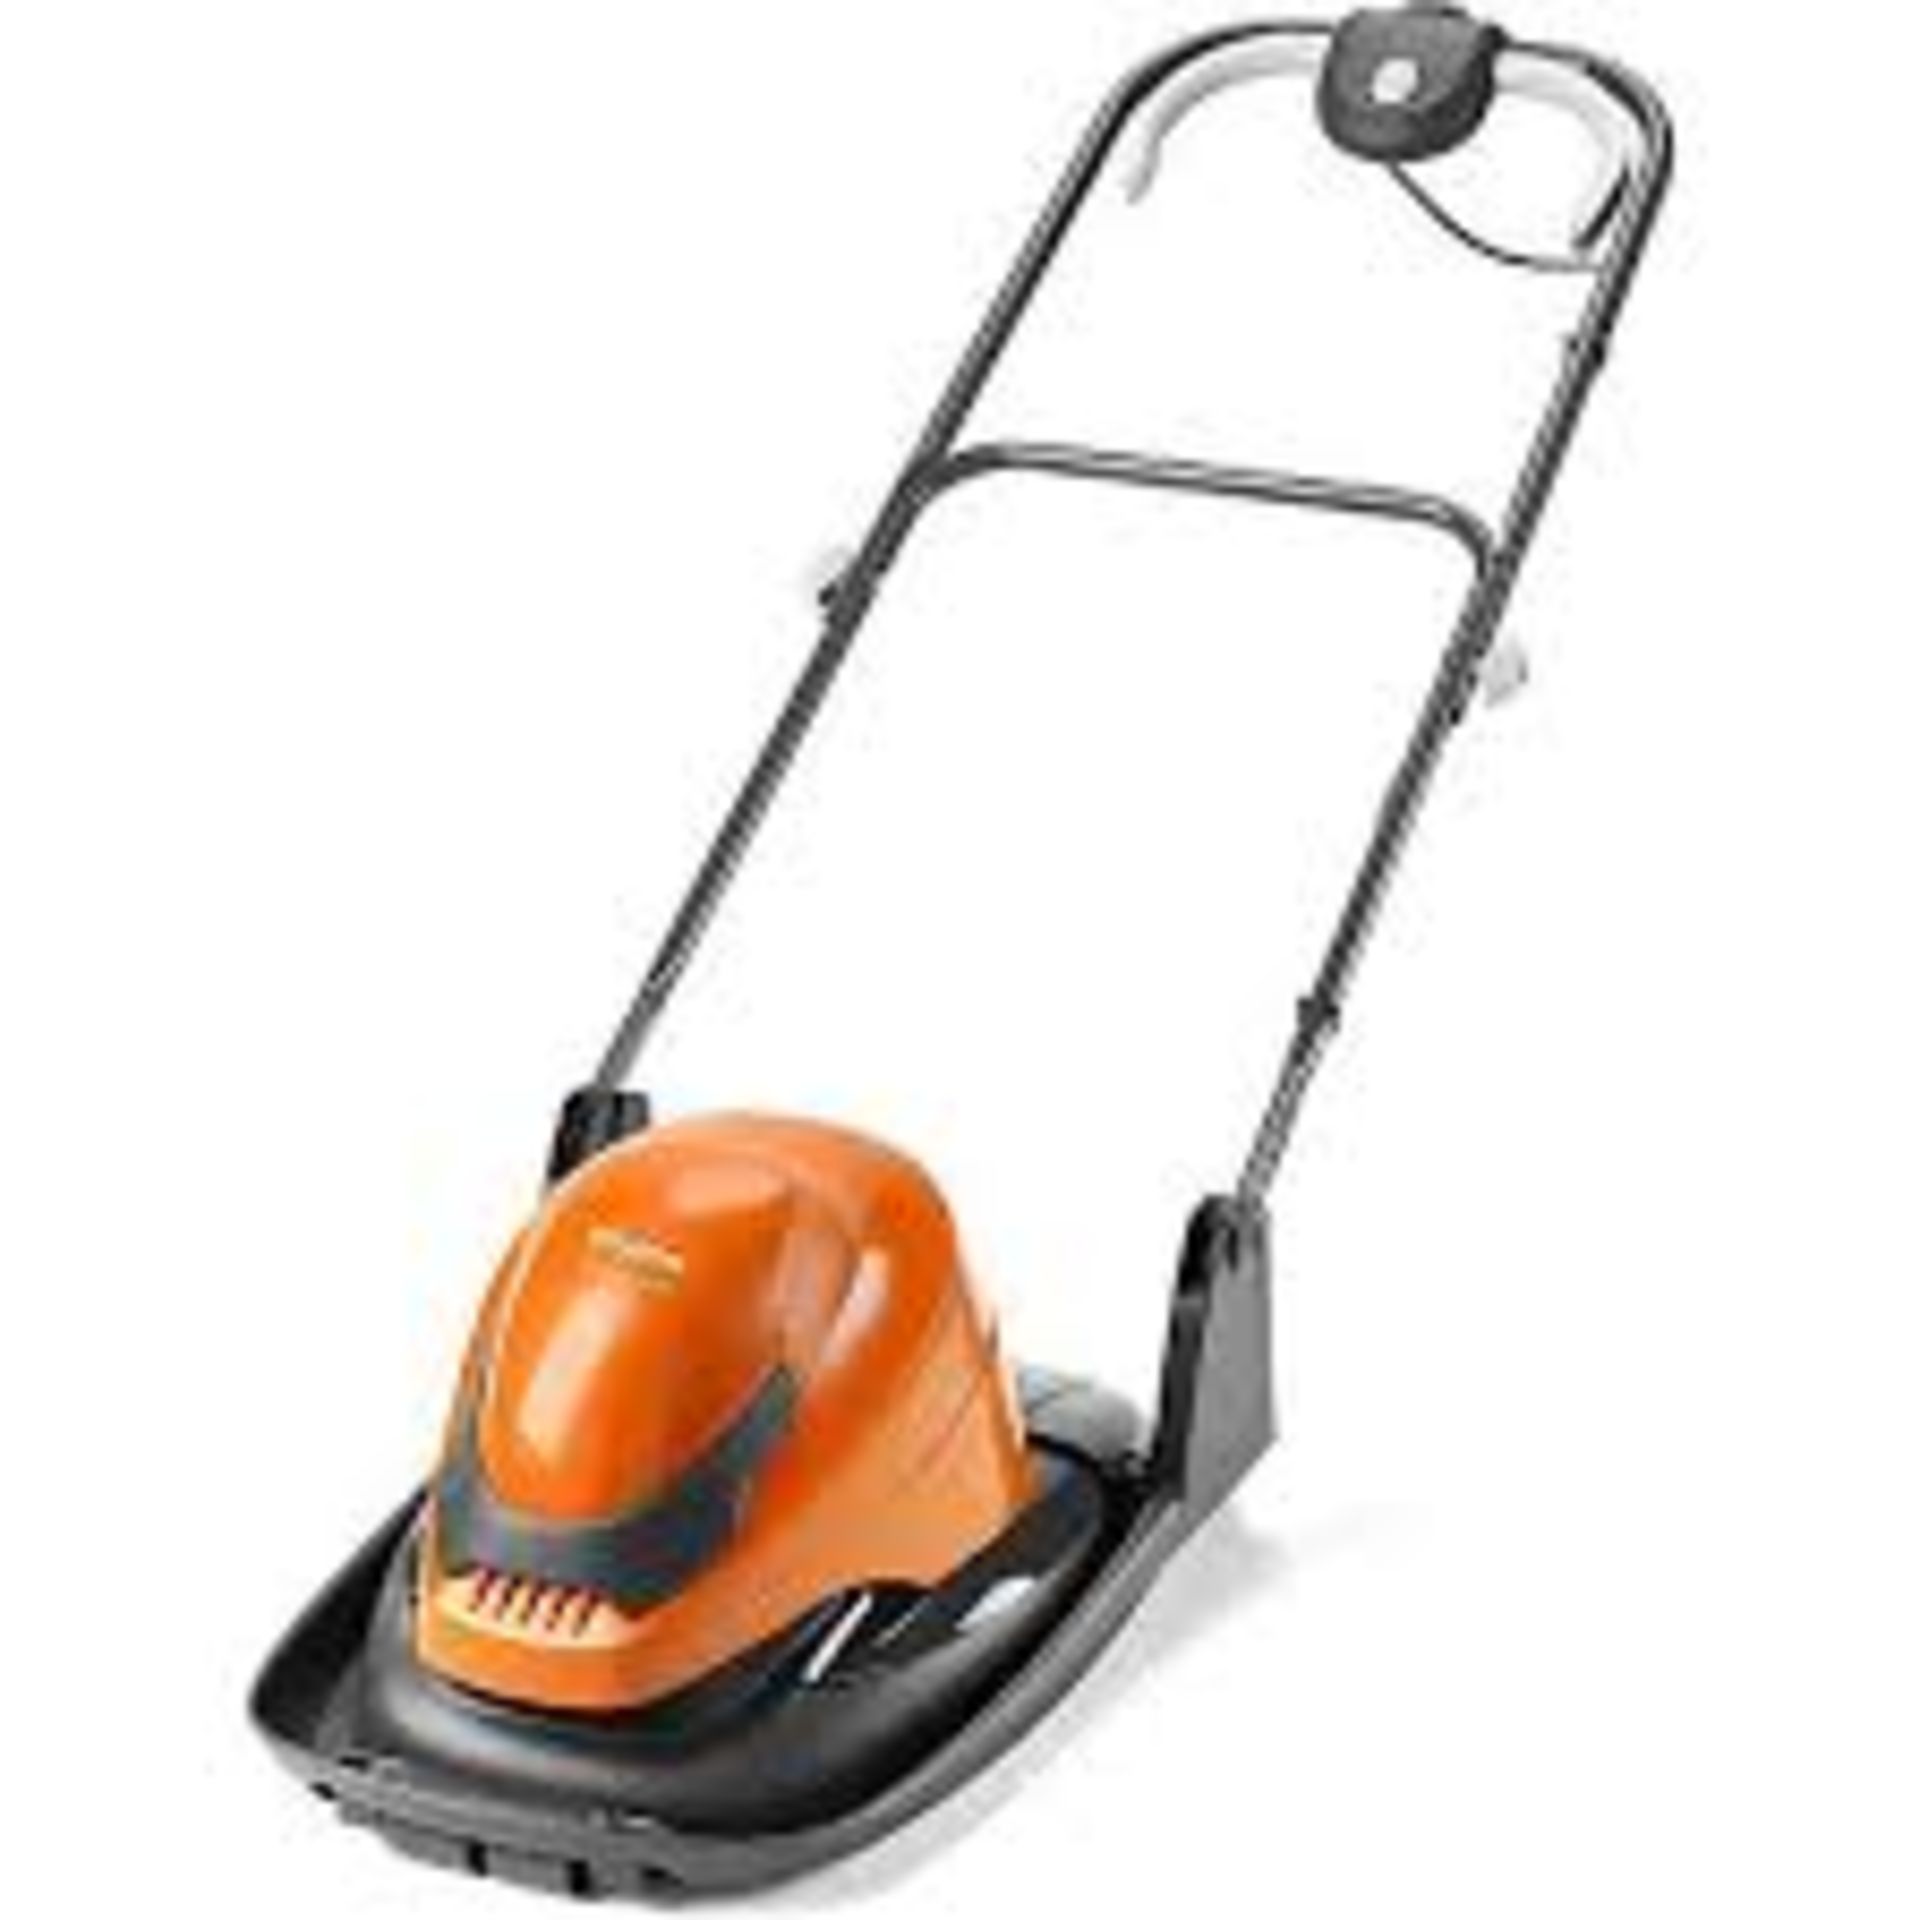 Flymo SimpliGlide 330 Corded Hover Lawnmower - 1700W. - ER50.